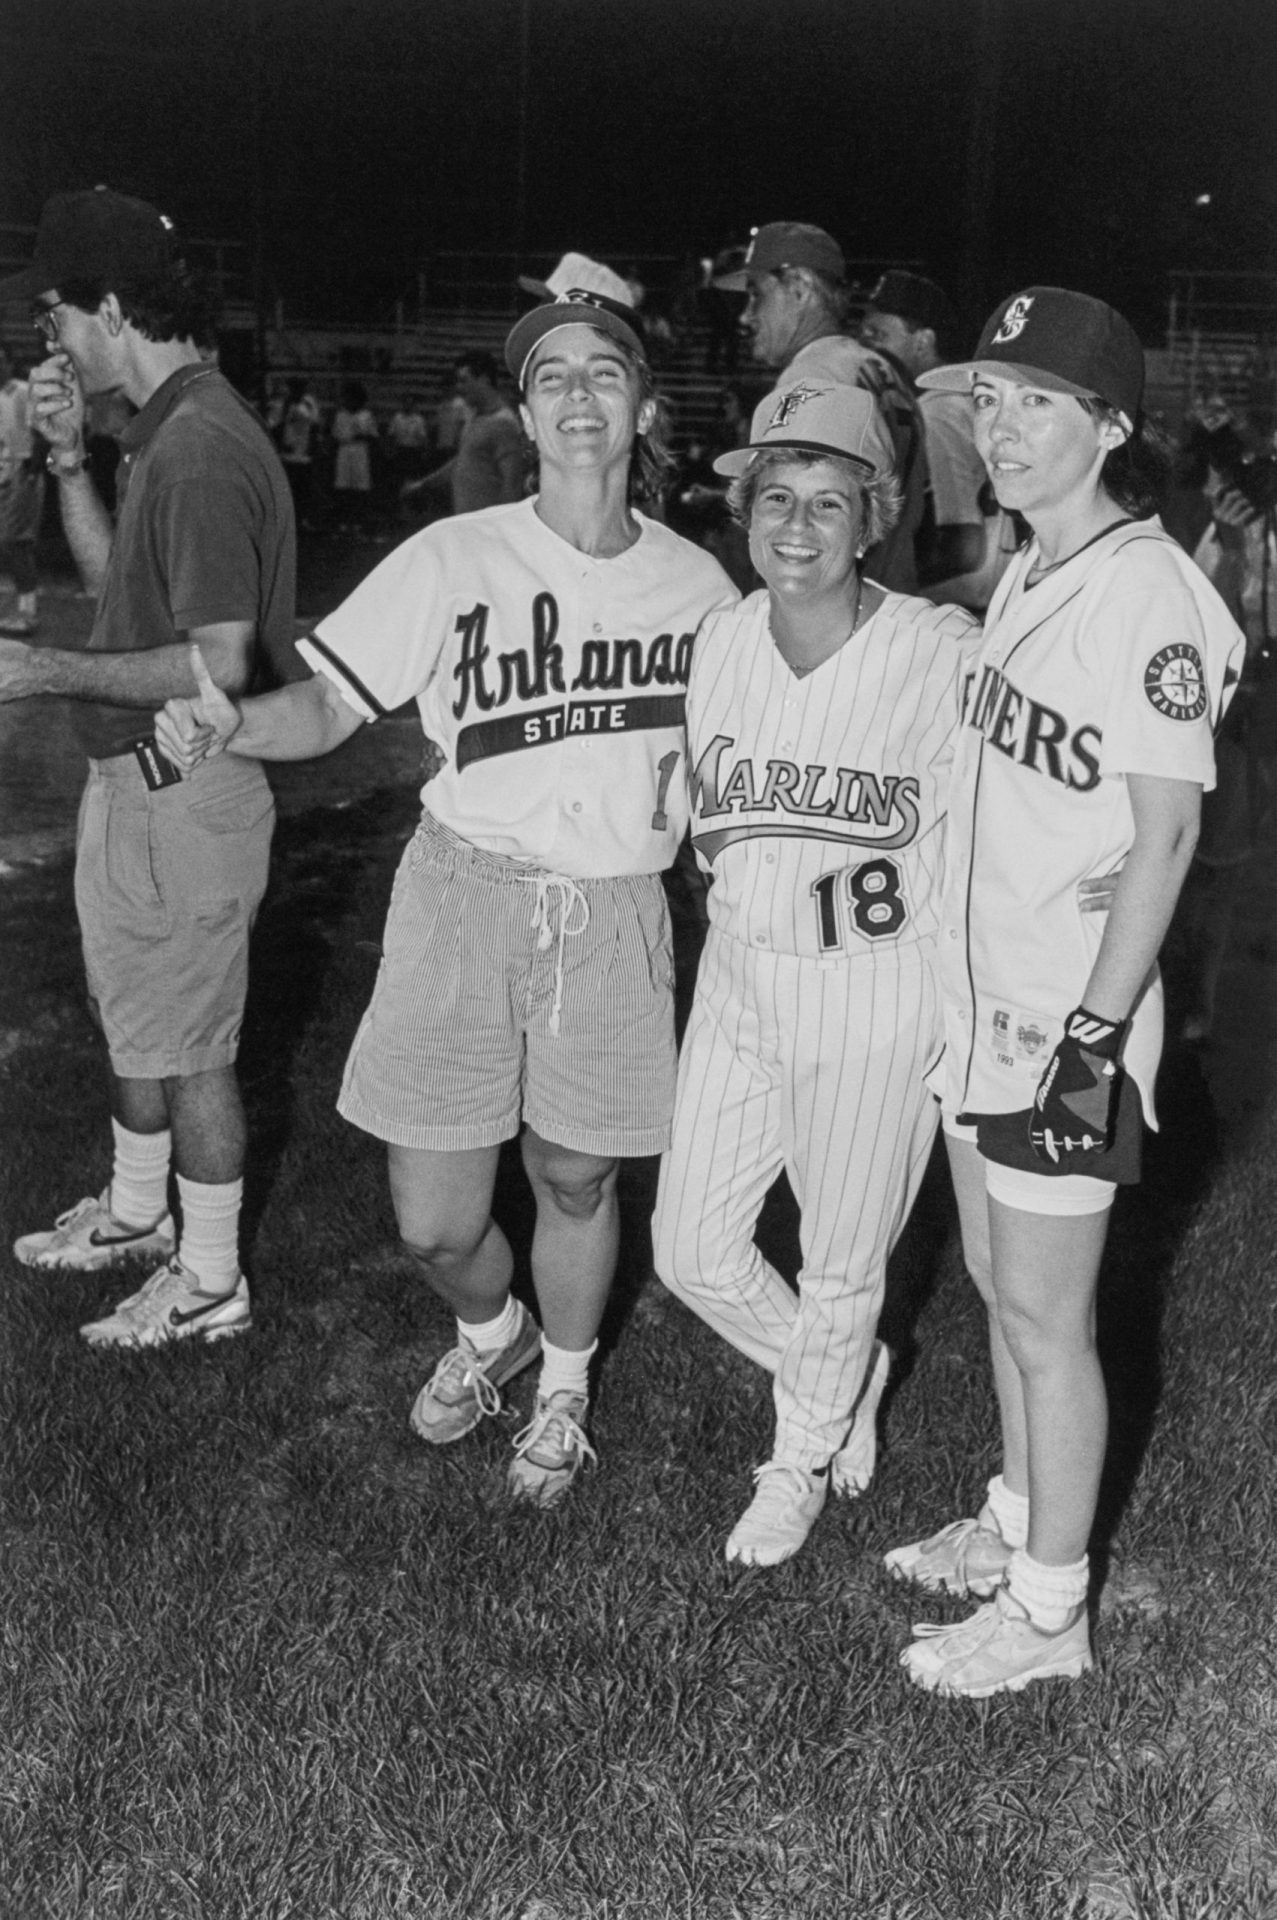 From left, Blanche Lambert Lincoln, Ileana Ros-Lehtinen and Maria Cantwell broke the gender barrier at the Congressional Baseball Game in 1993. (Chris Martin/CQ Roll Call file photo)